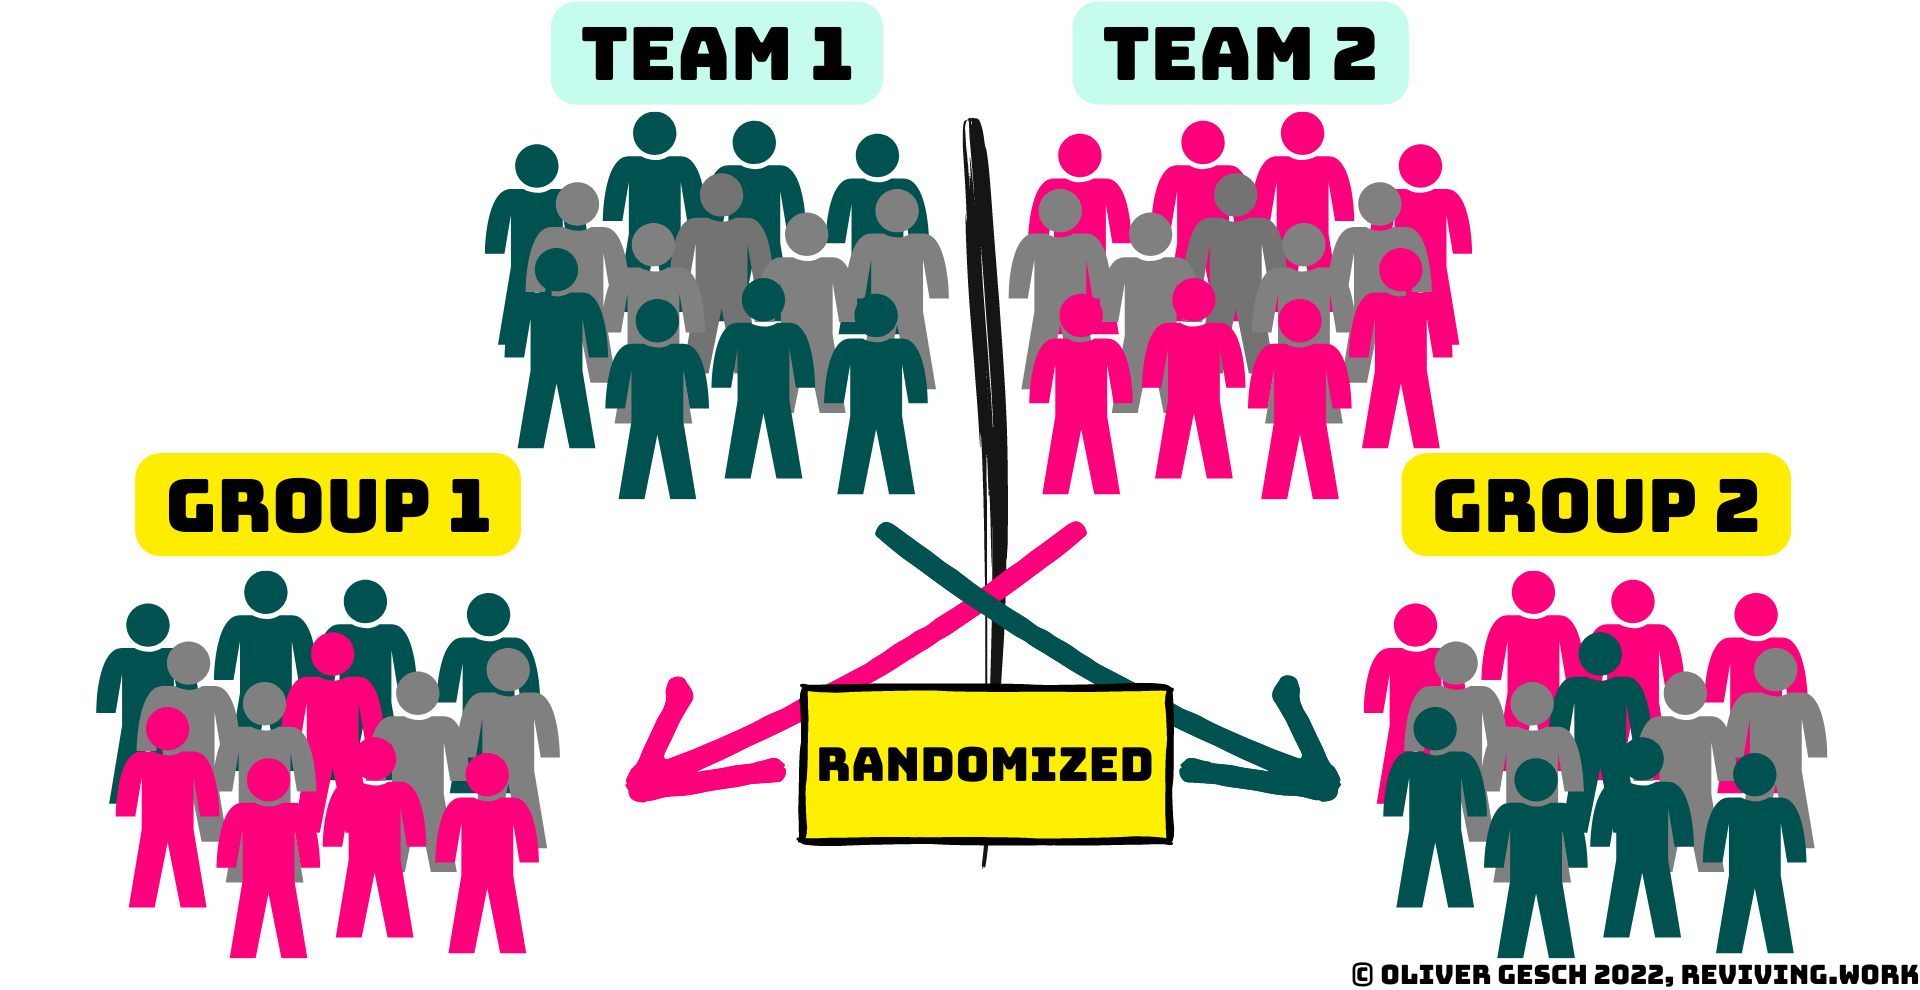 Football players are randomly assigned to two different teams visualizing the resulting differences between groups vs. teams.